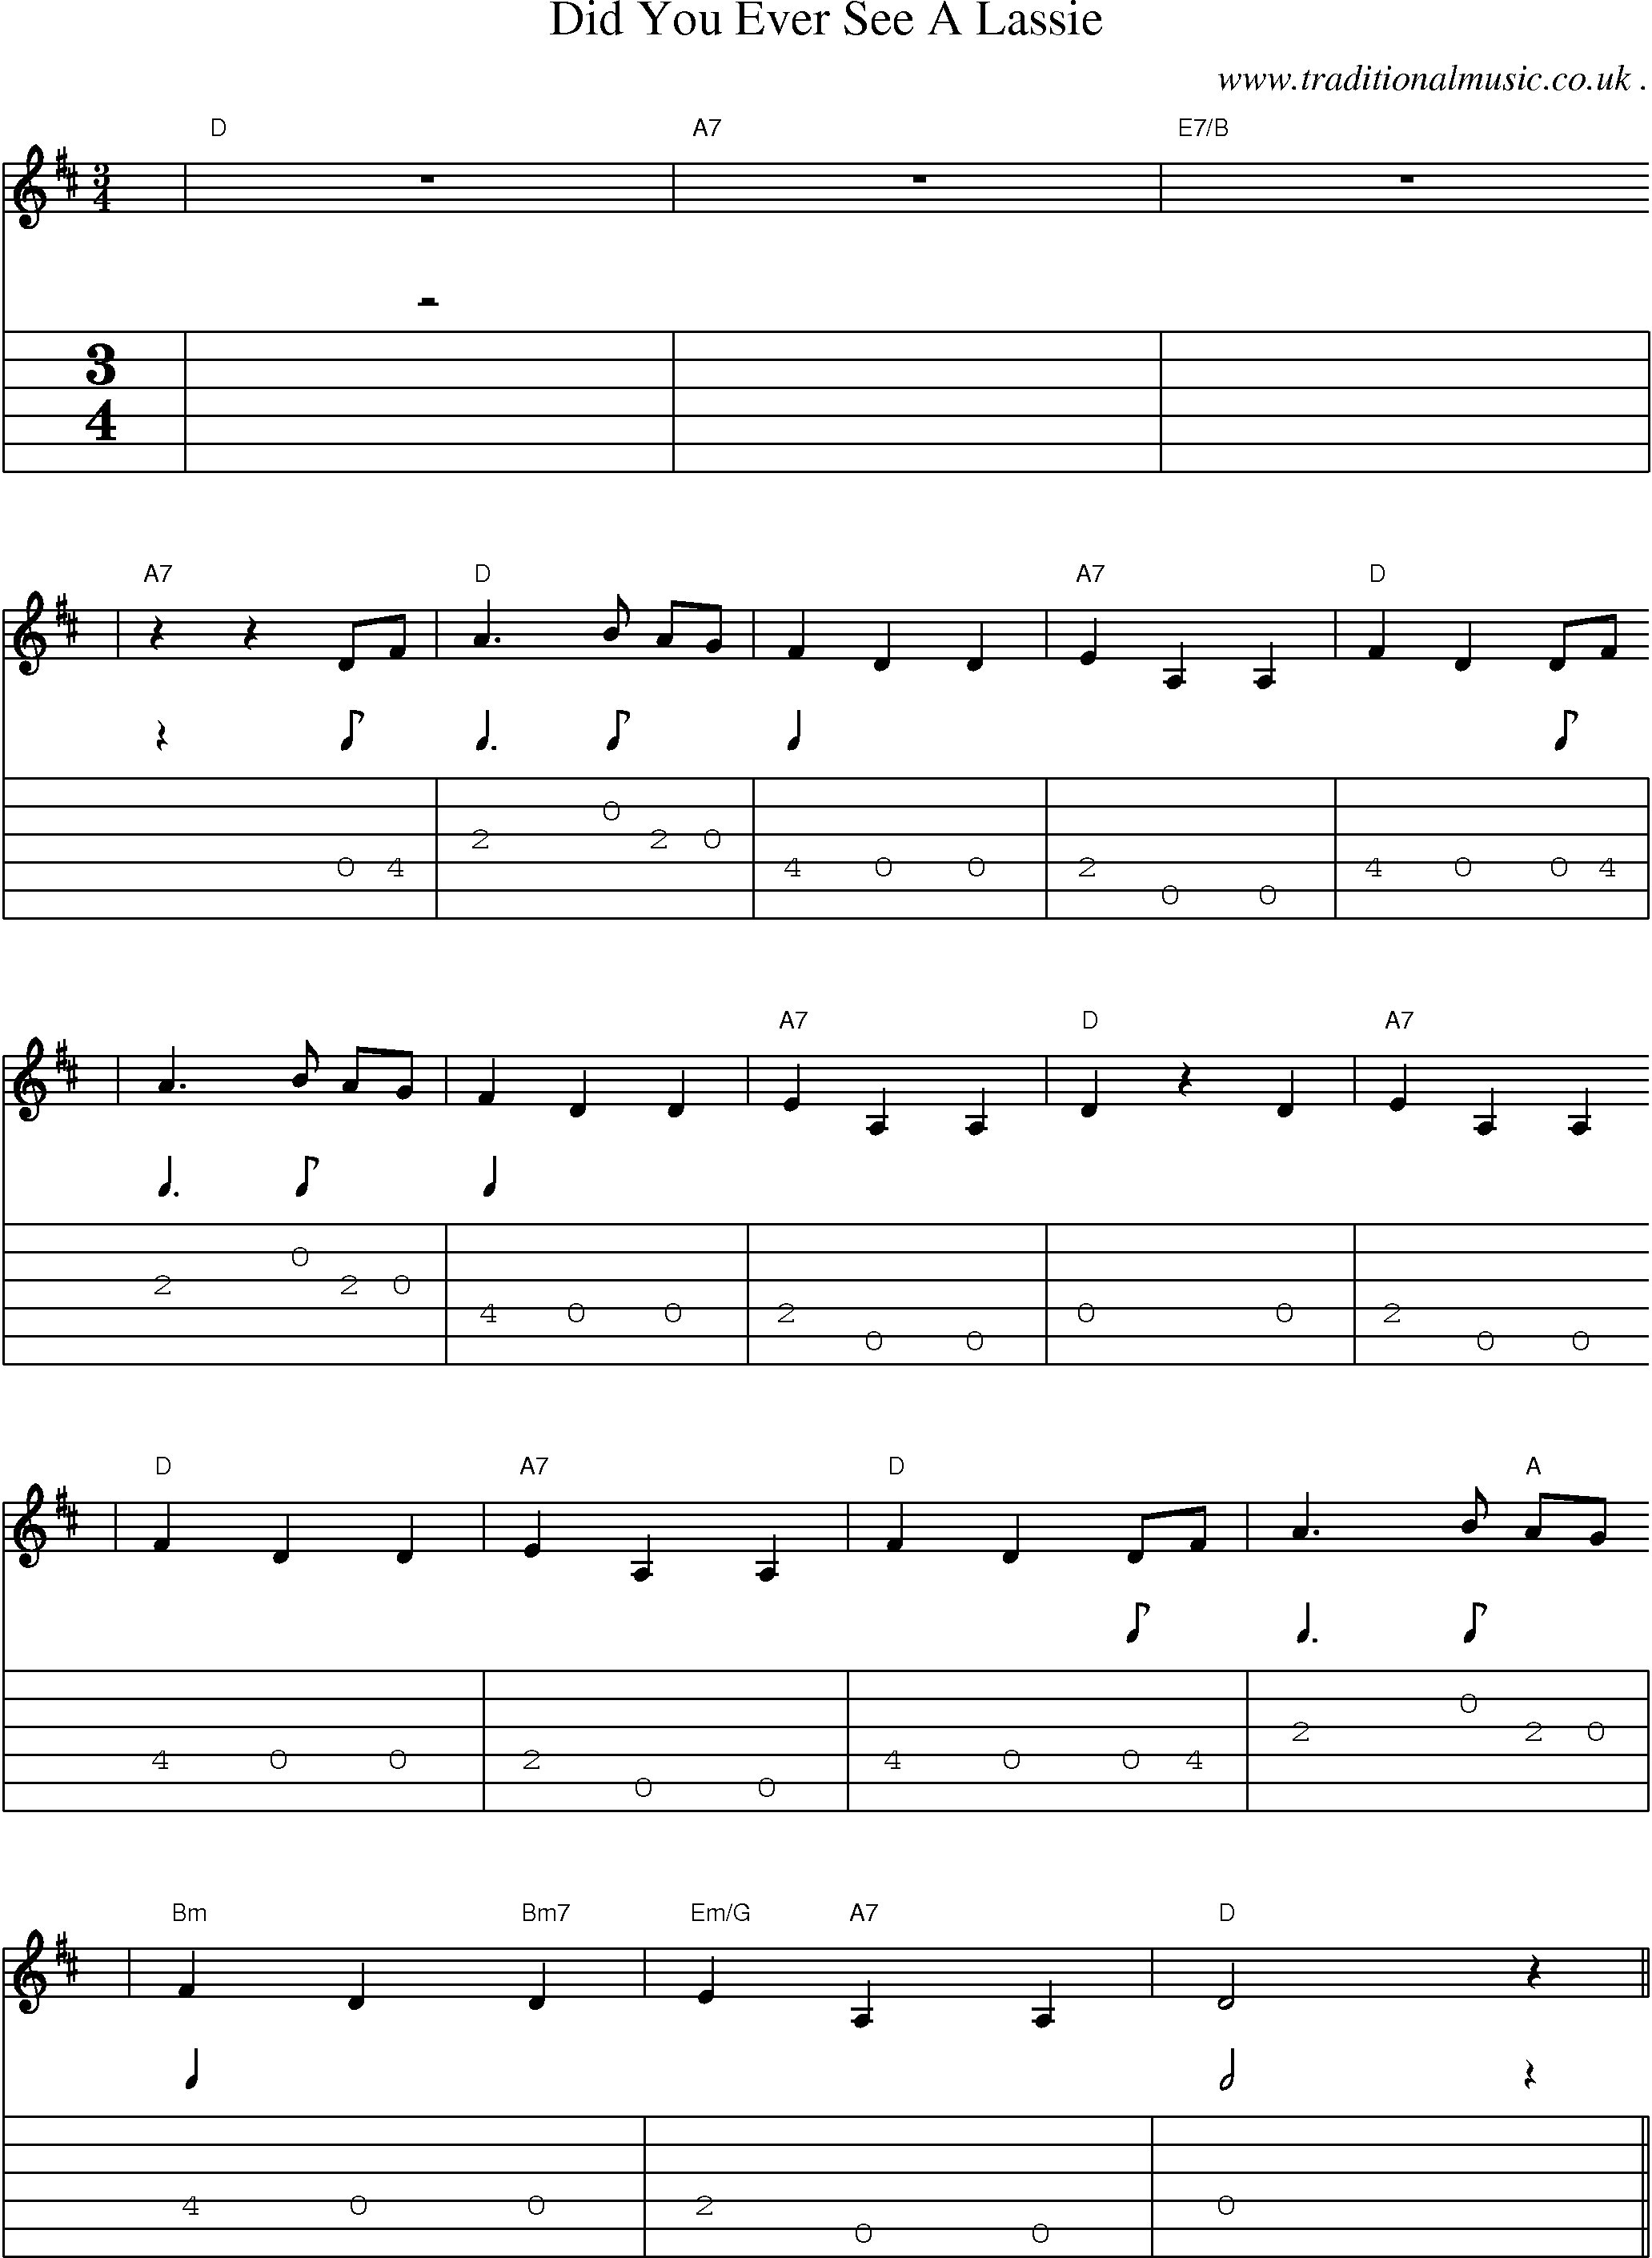 Music Score and Guitar Tabs for Did You Ever See A Lassie